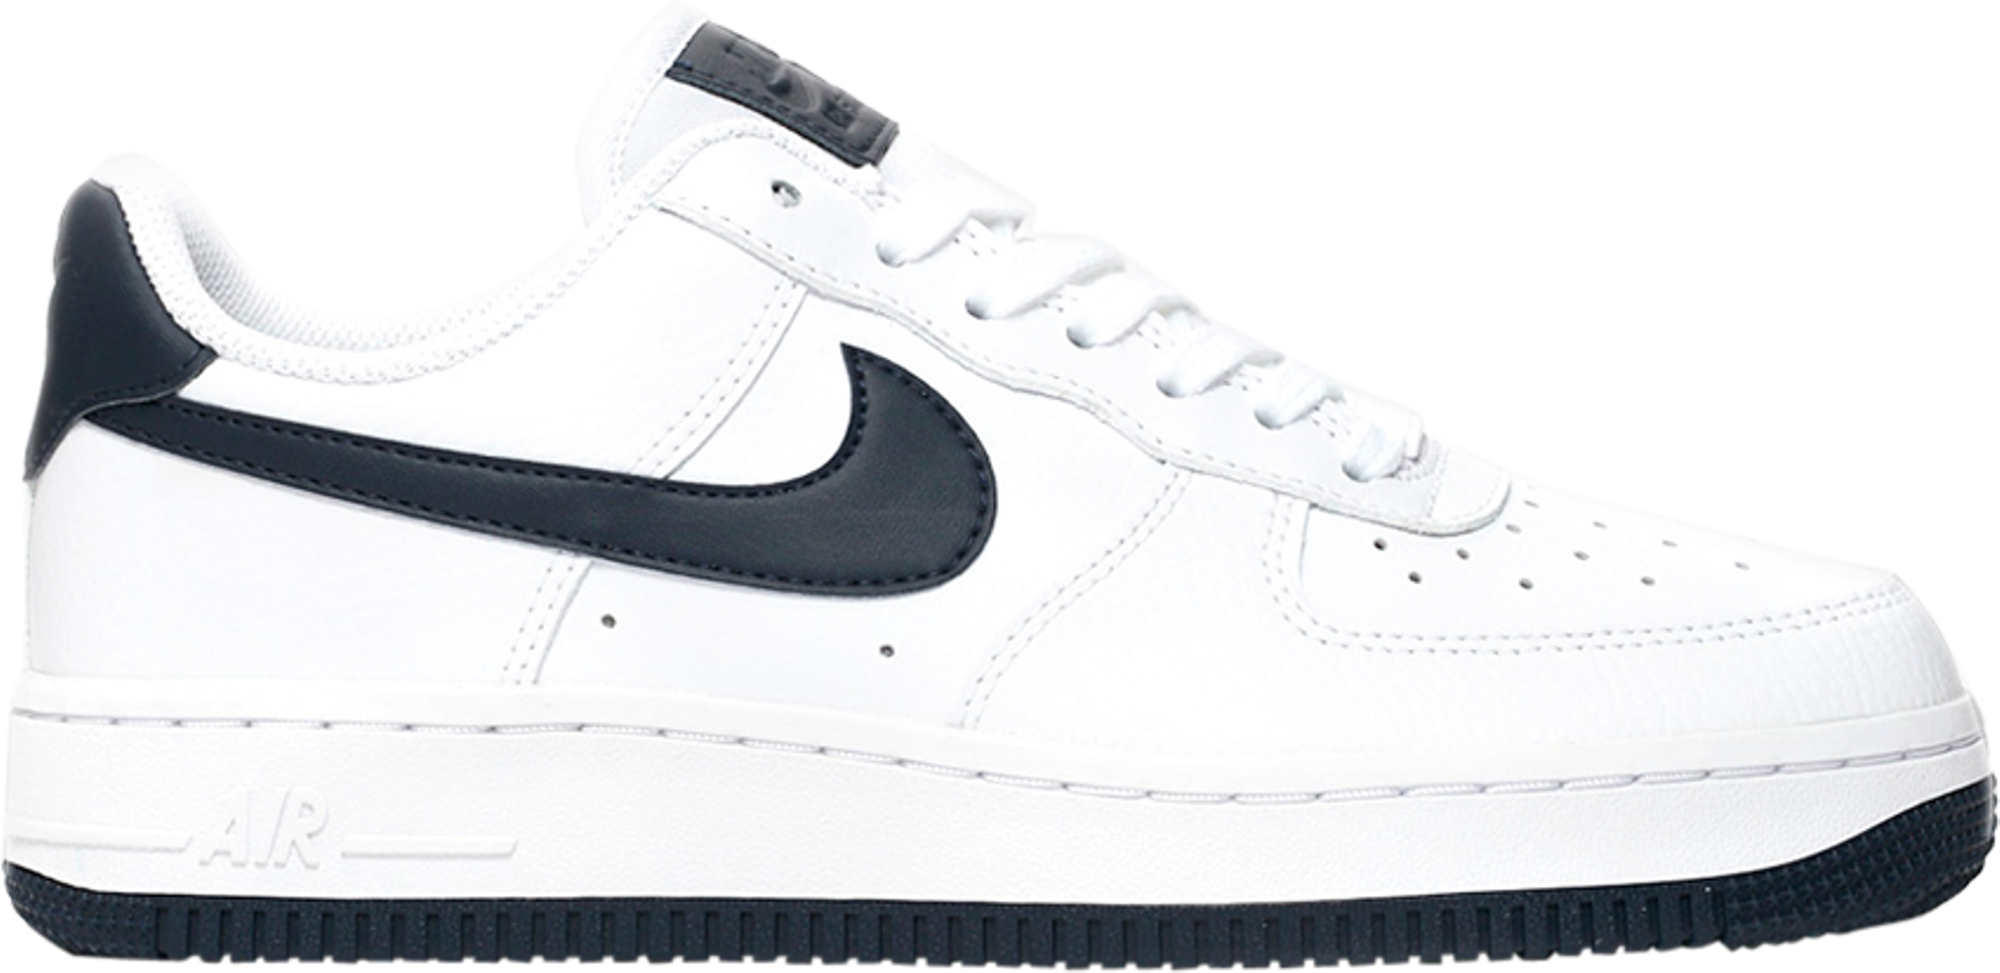 Buy Wmns Air Force 1 07 'White Obsidian' - AH0287 108 | GOAT